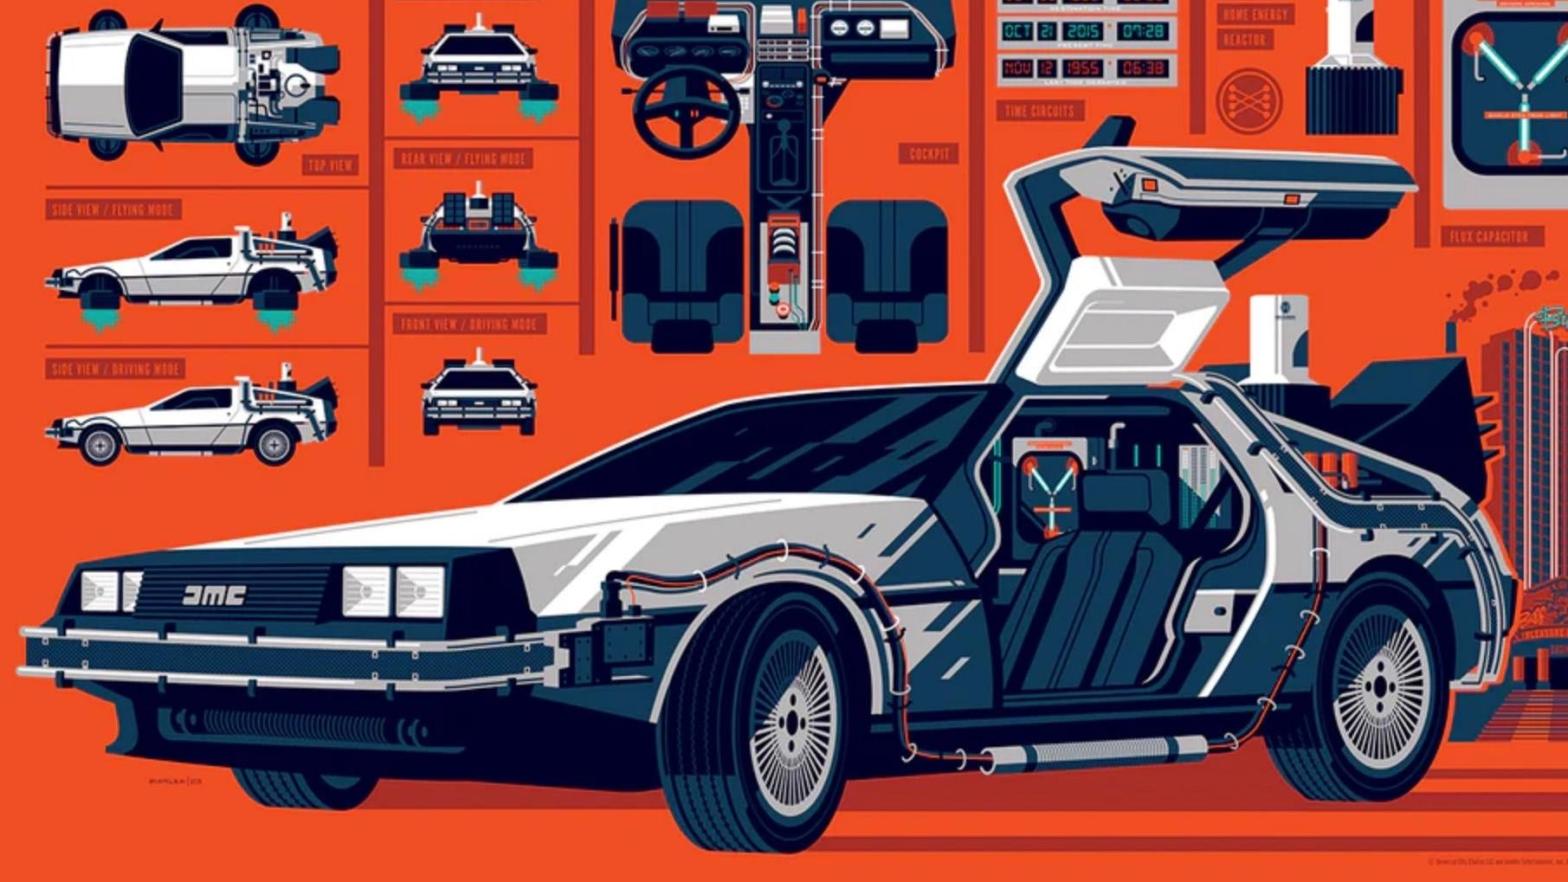 A crop of a new poster by Tom Whalen. (Image: Bottleneck/Vice)